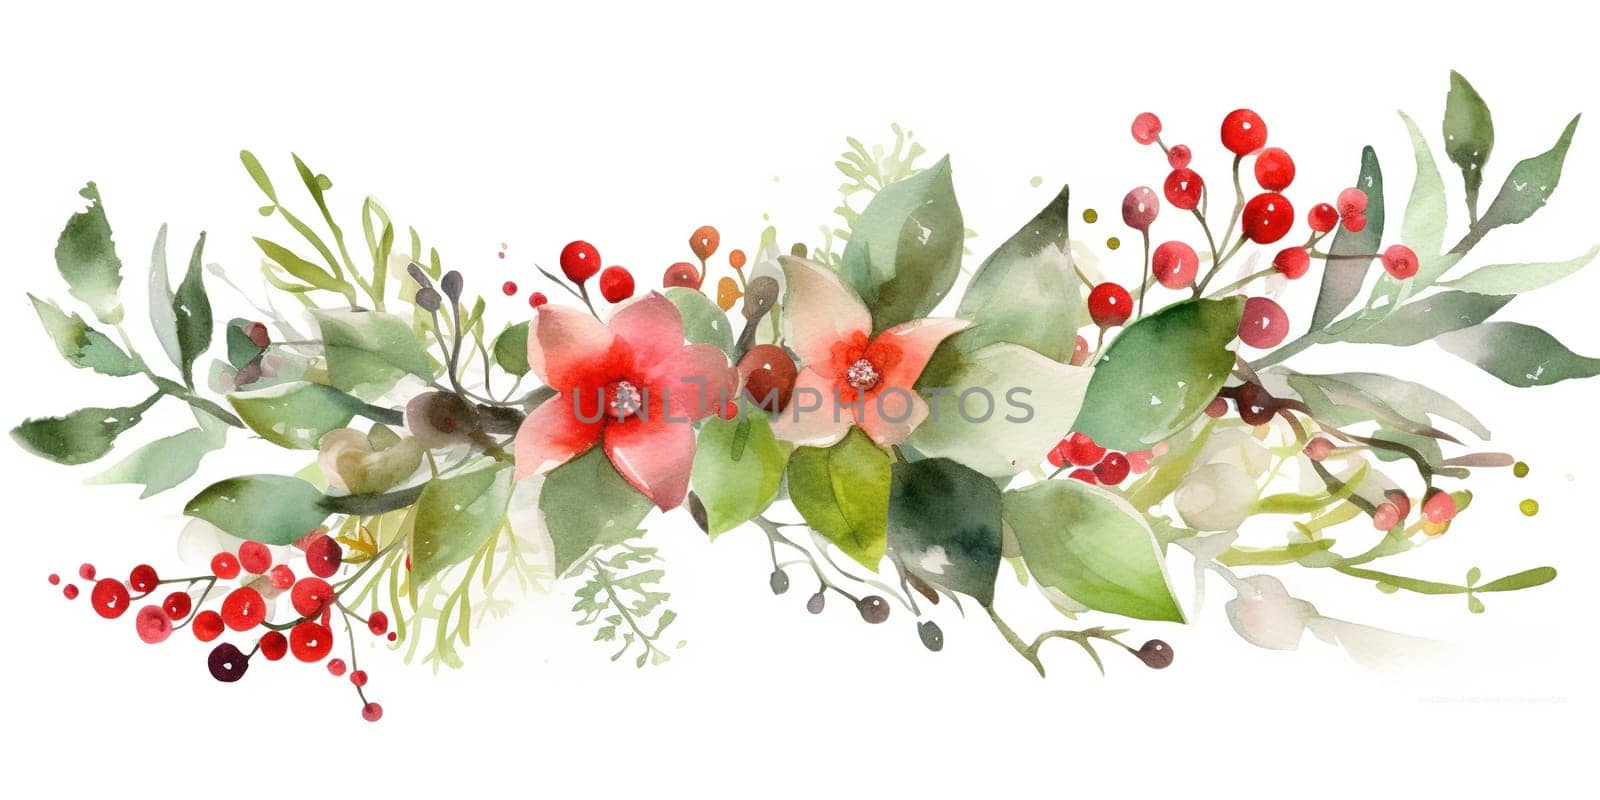 Watercolor Illustration Of Floral Pattern With Flowers by GekaSkr